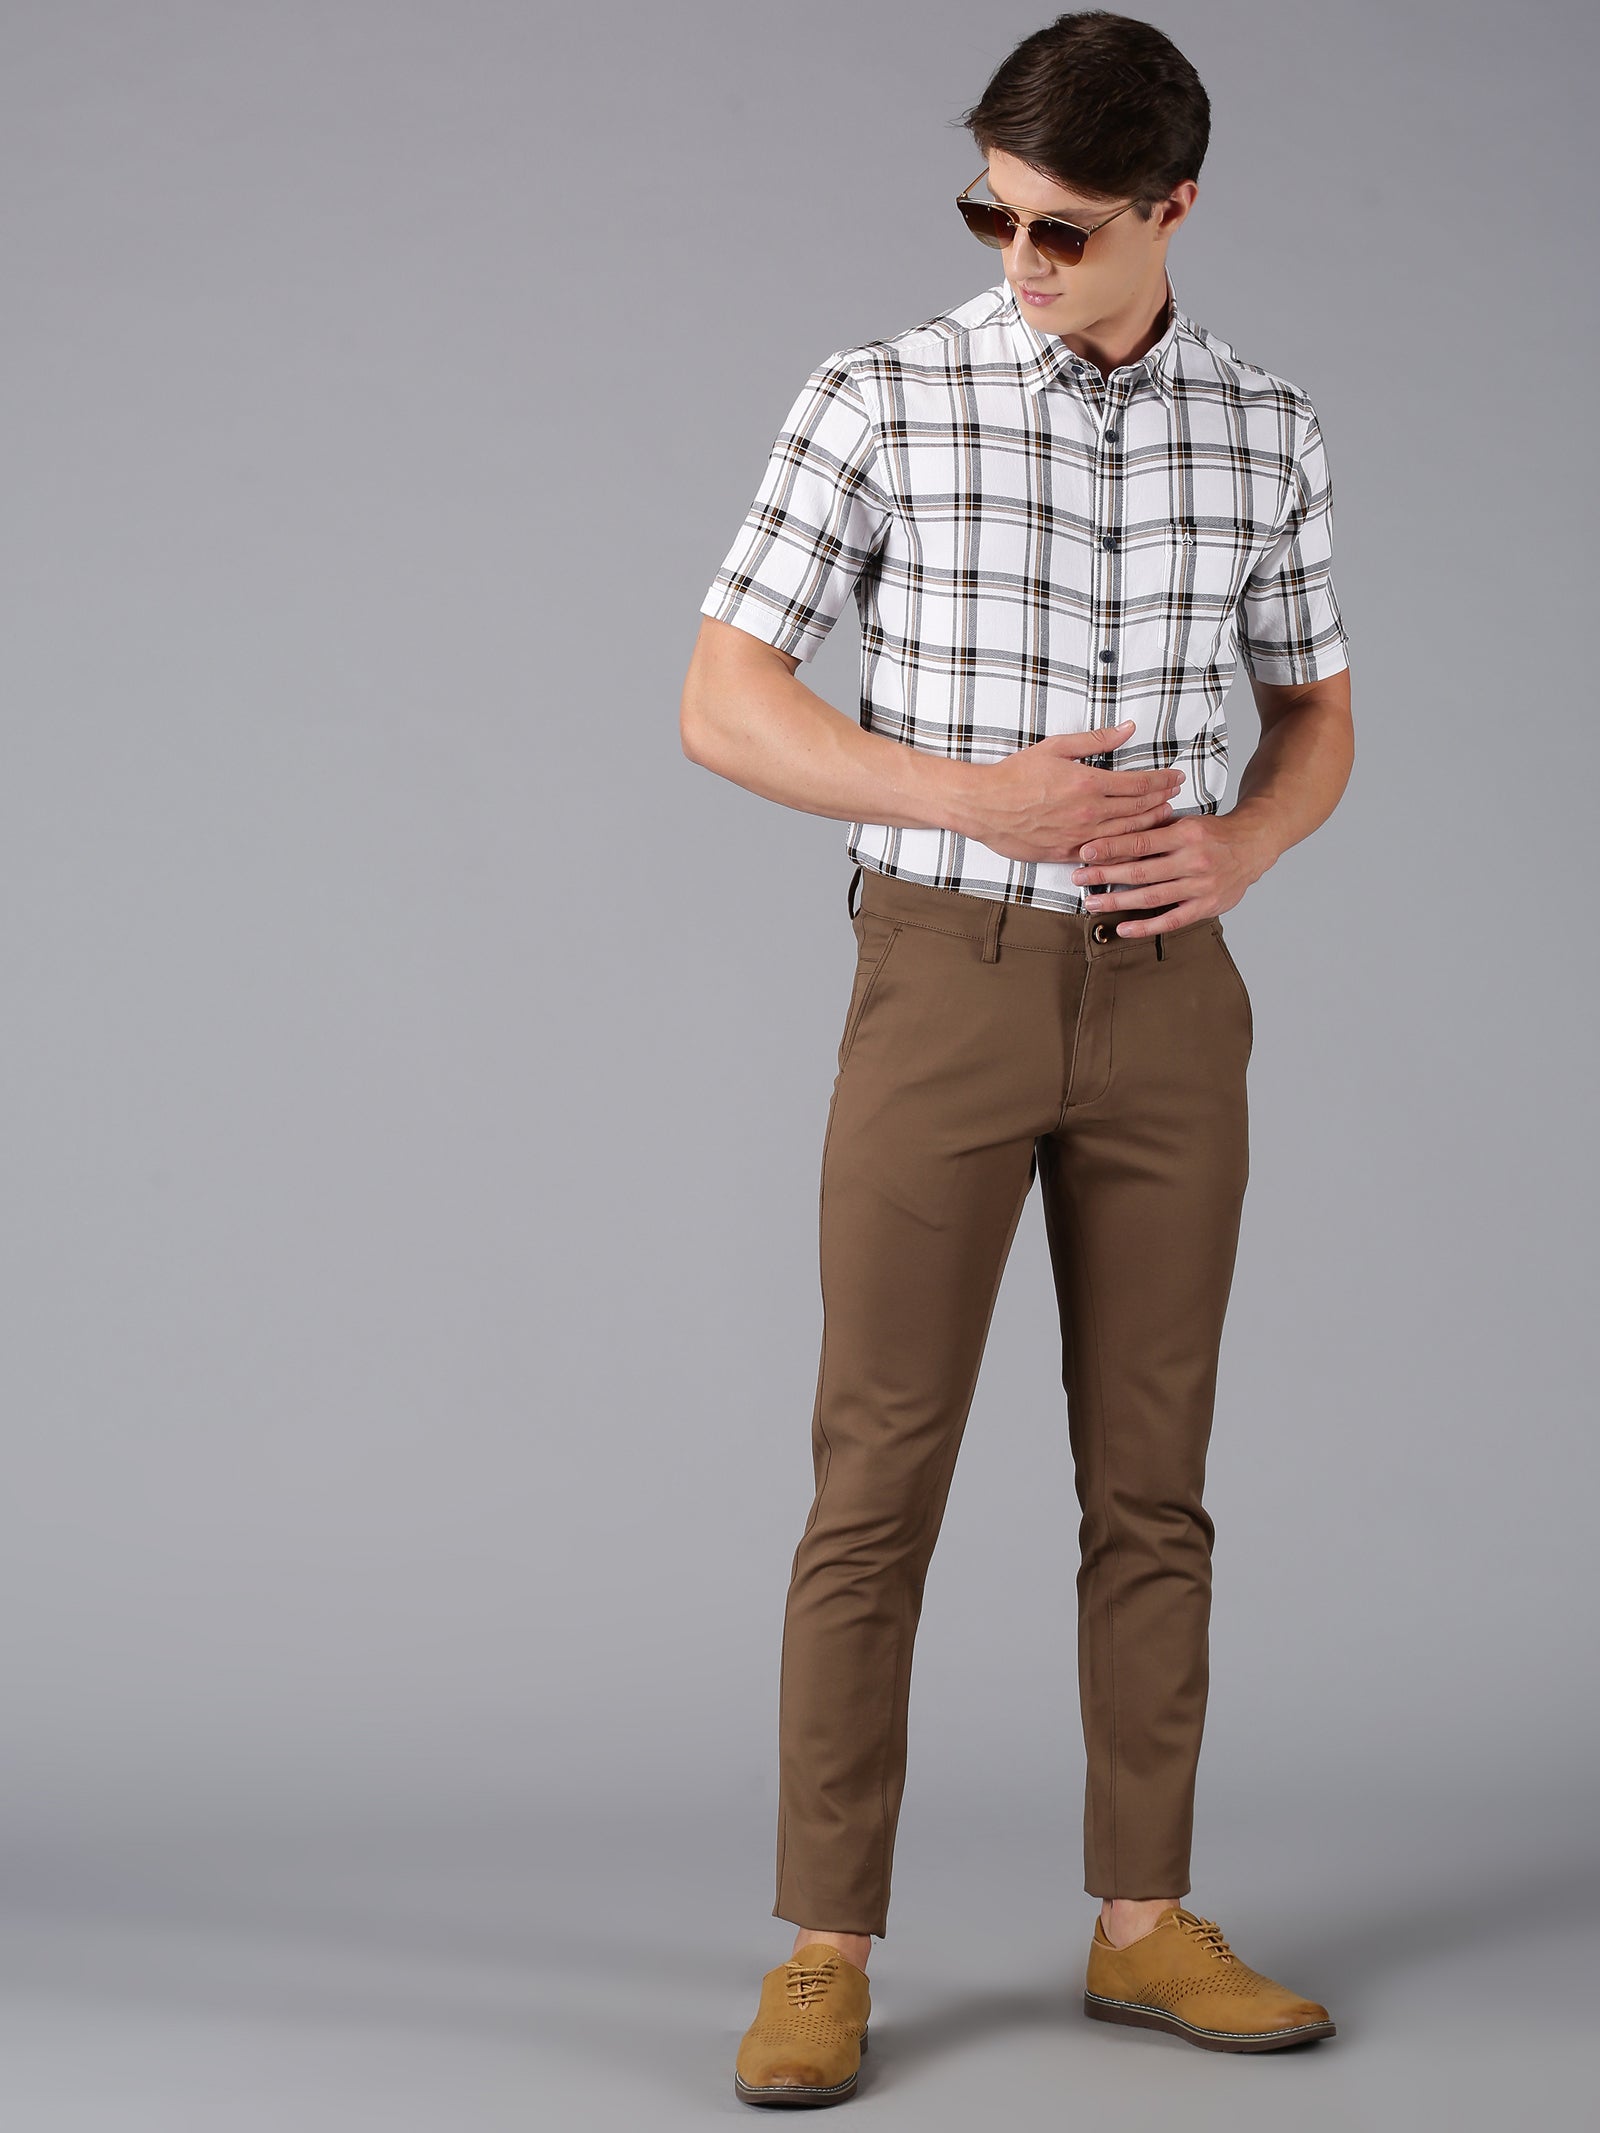 Buy Coffee Brown and White Combo of 2 Men Pants Cotton for Best Price,  Reviews, Free Shipping